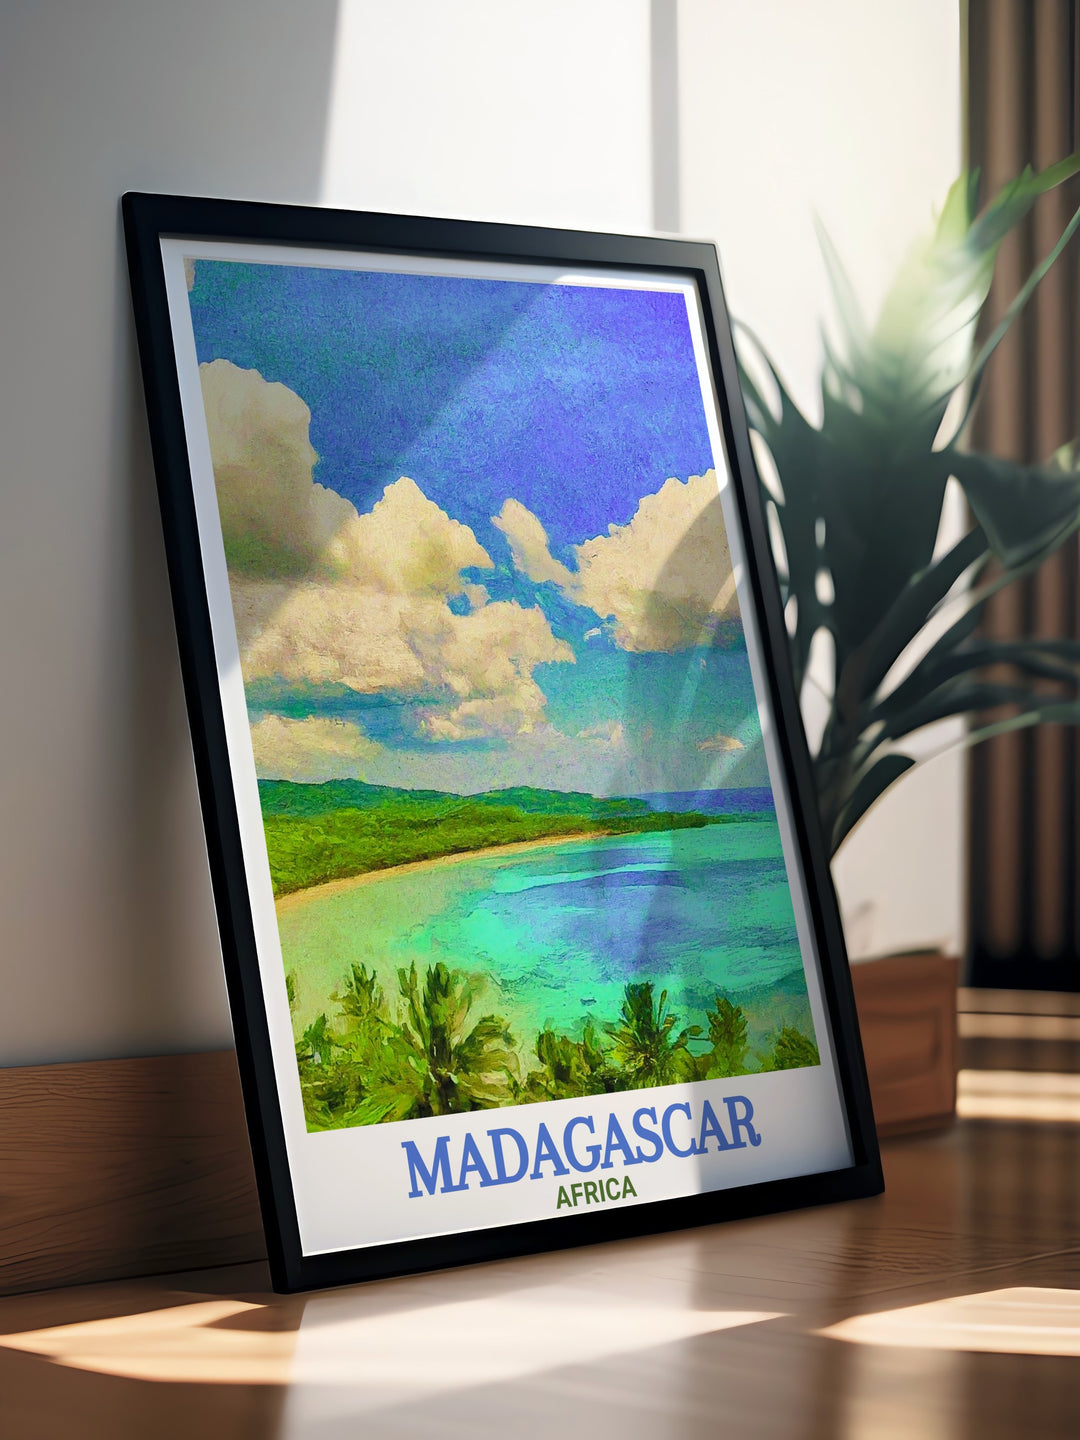 Nosy Be art print capturing the lush island scenery of Madagascar suitable for Africa travel gifts and home decor perfect for birthdays anniversaries or any special occasion a stunning piece for any art collection